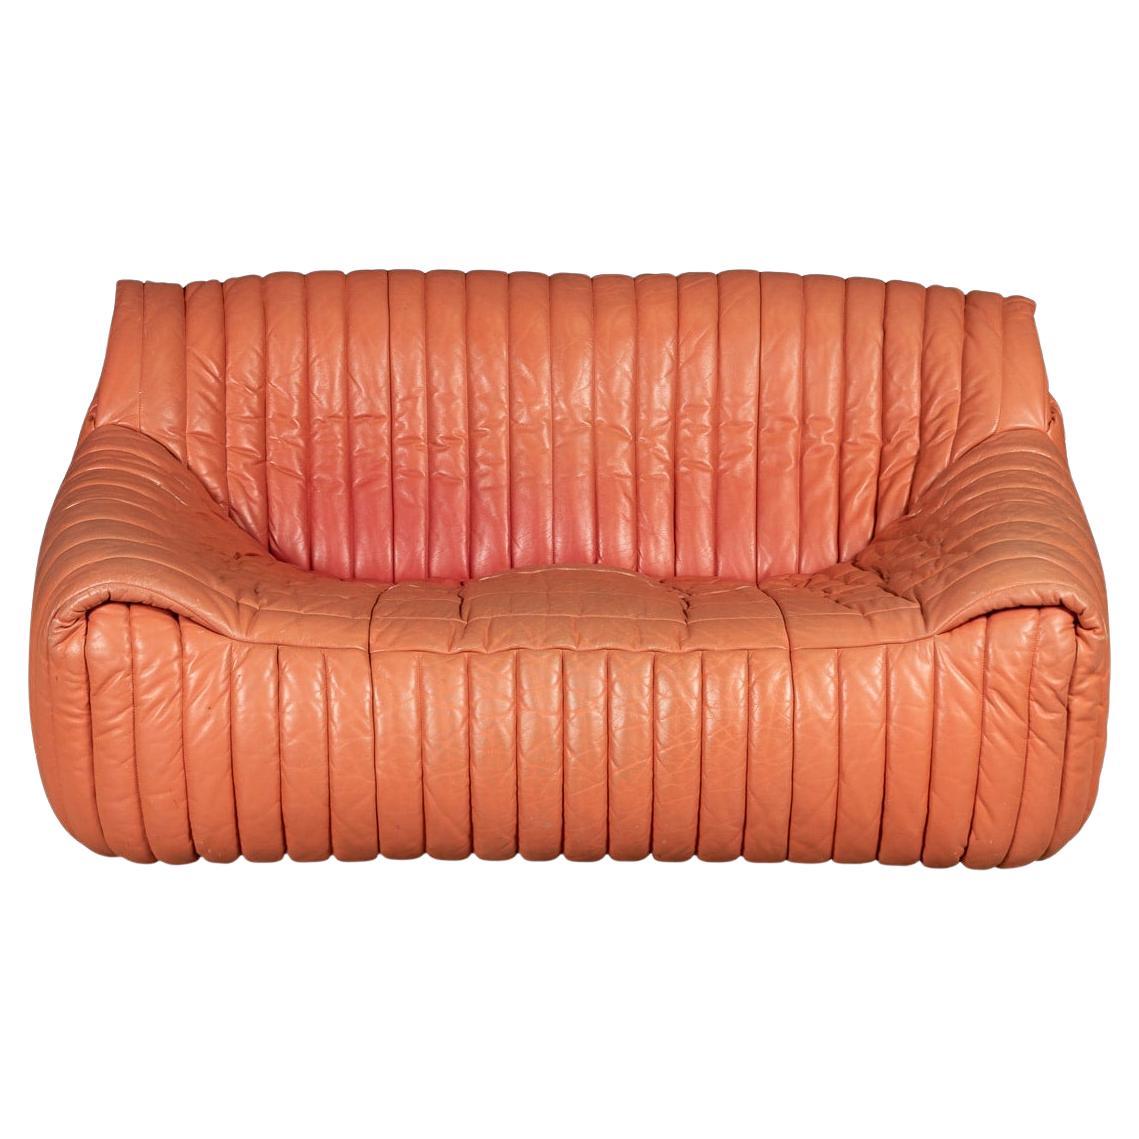 A "Sandra" Red Leather Sofa By Annie Hiéronimus For Ligne Roset, France